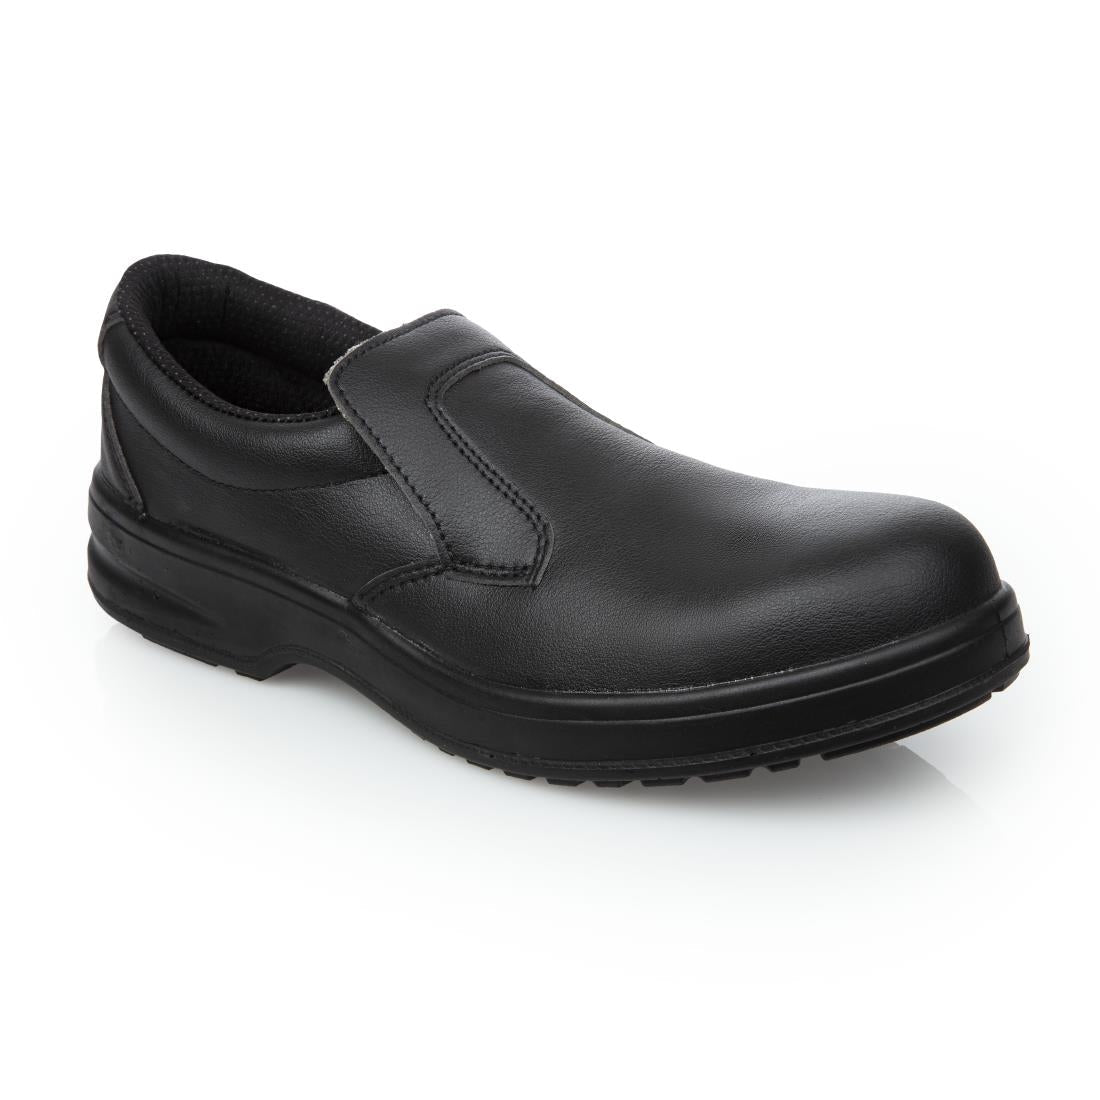 A845-43 Slipbuster Lite Slip On Safety Shoes Black 43 JD Catering Equipment Solutions Ltd